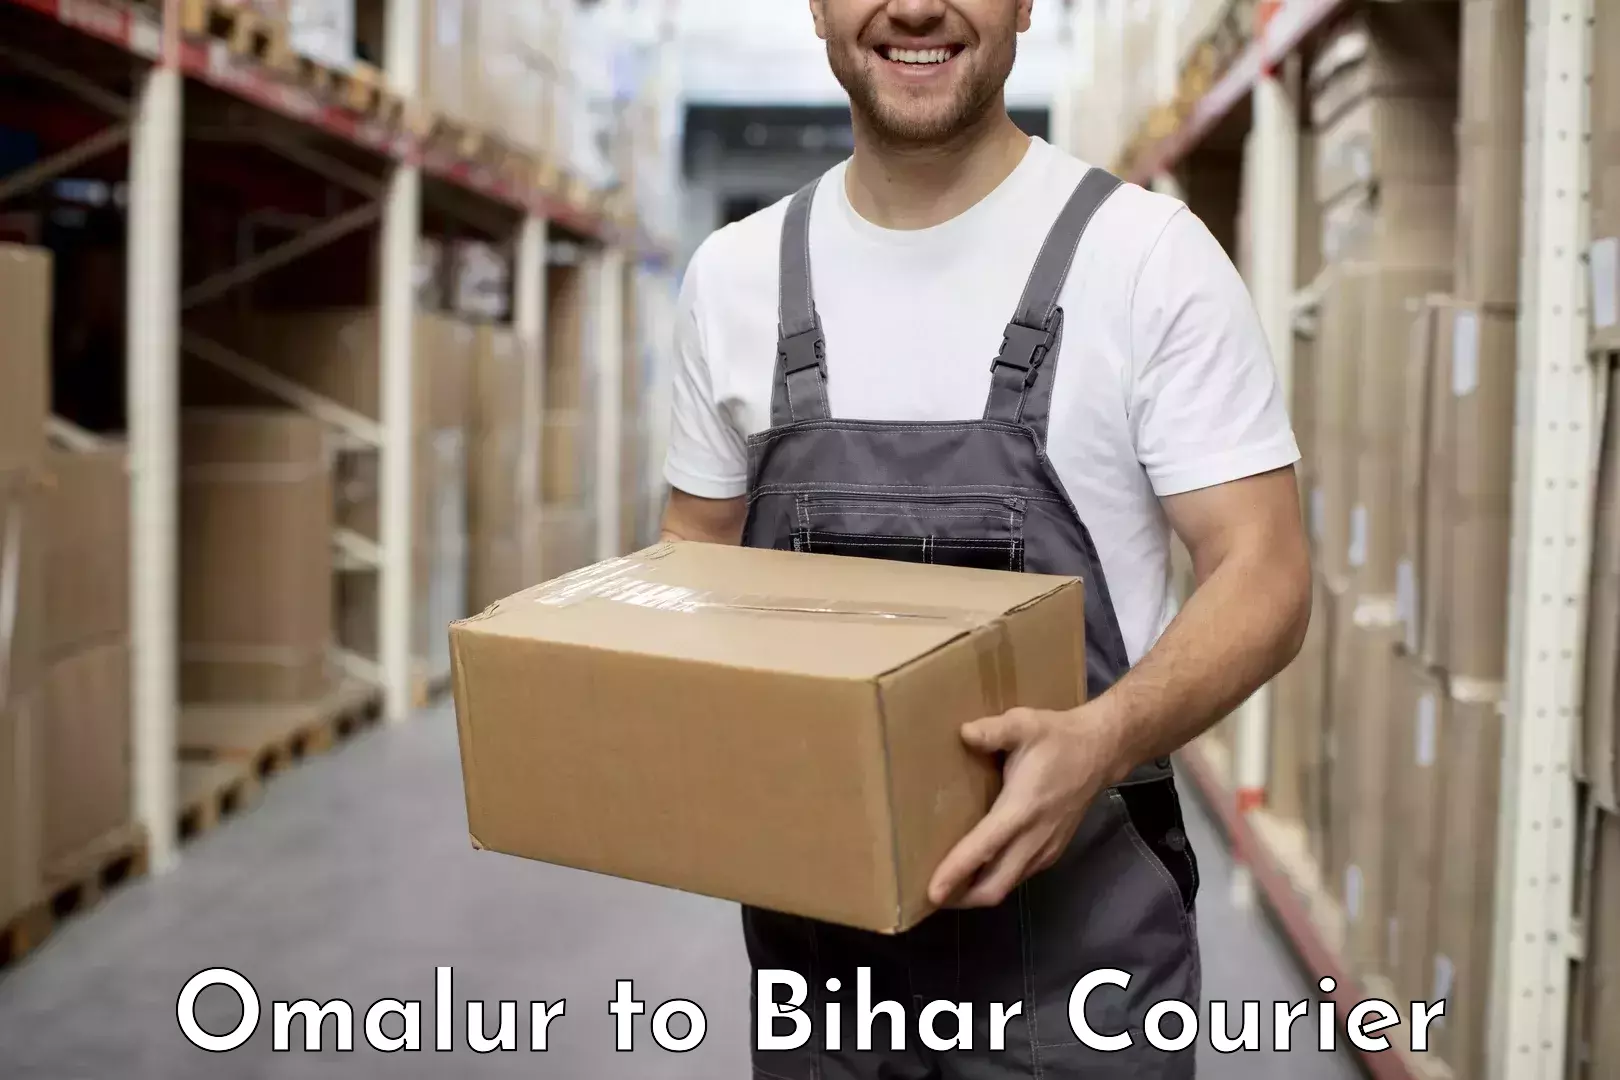 Efficient package consolidation Omalur to Bihar